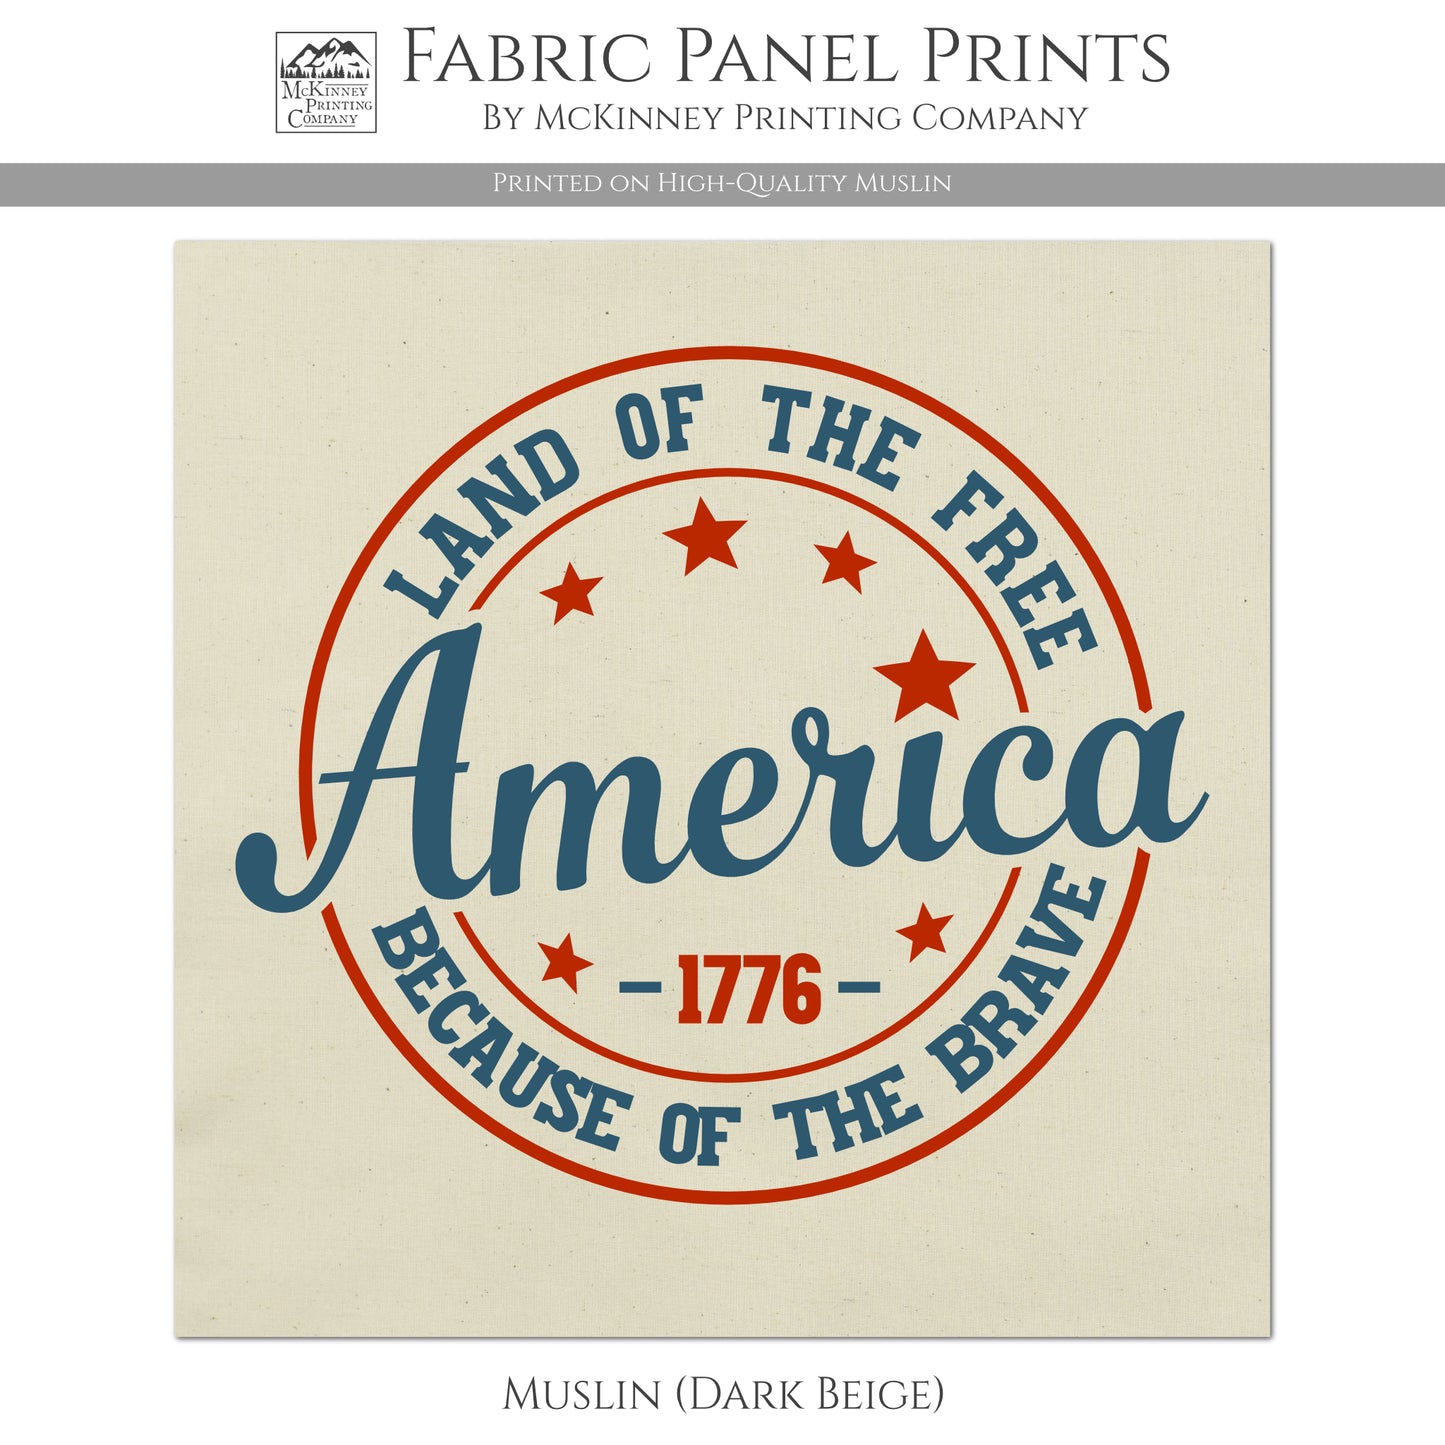 America - Land of the Free, because of the Brave - 1776 - Fabric Panel Print - Muslin